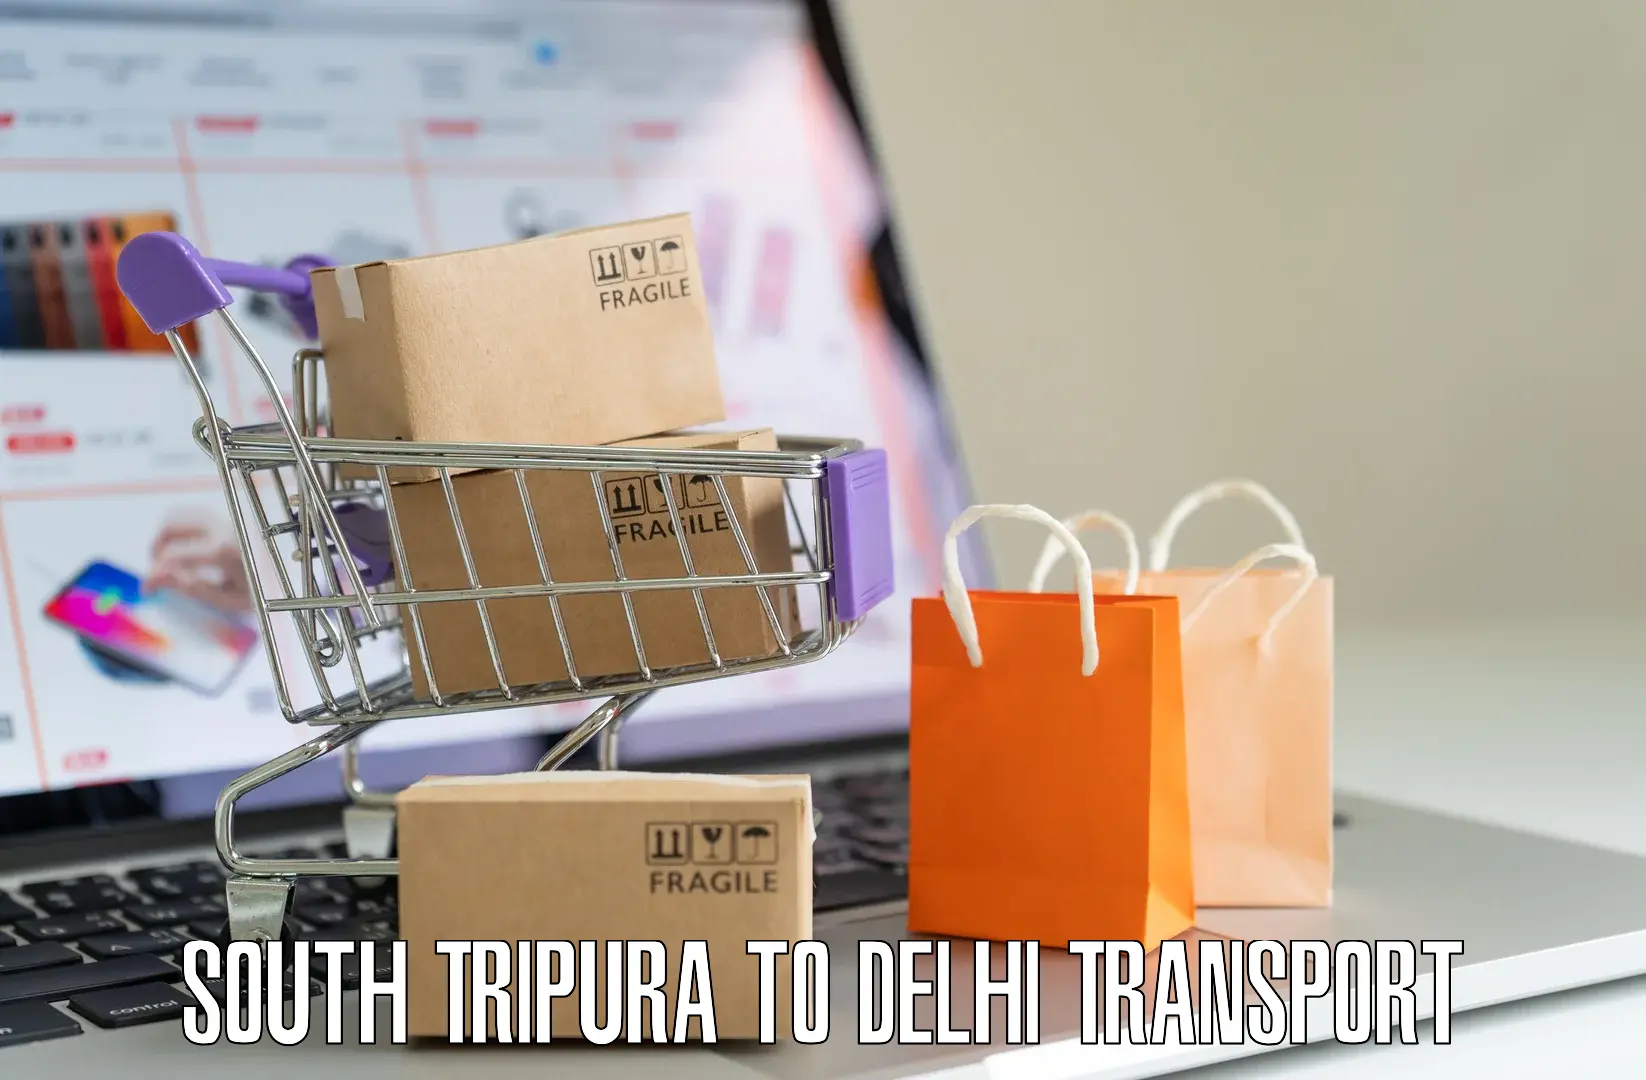 Commercial transport service South Tripura to Lodhi Road